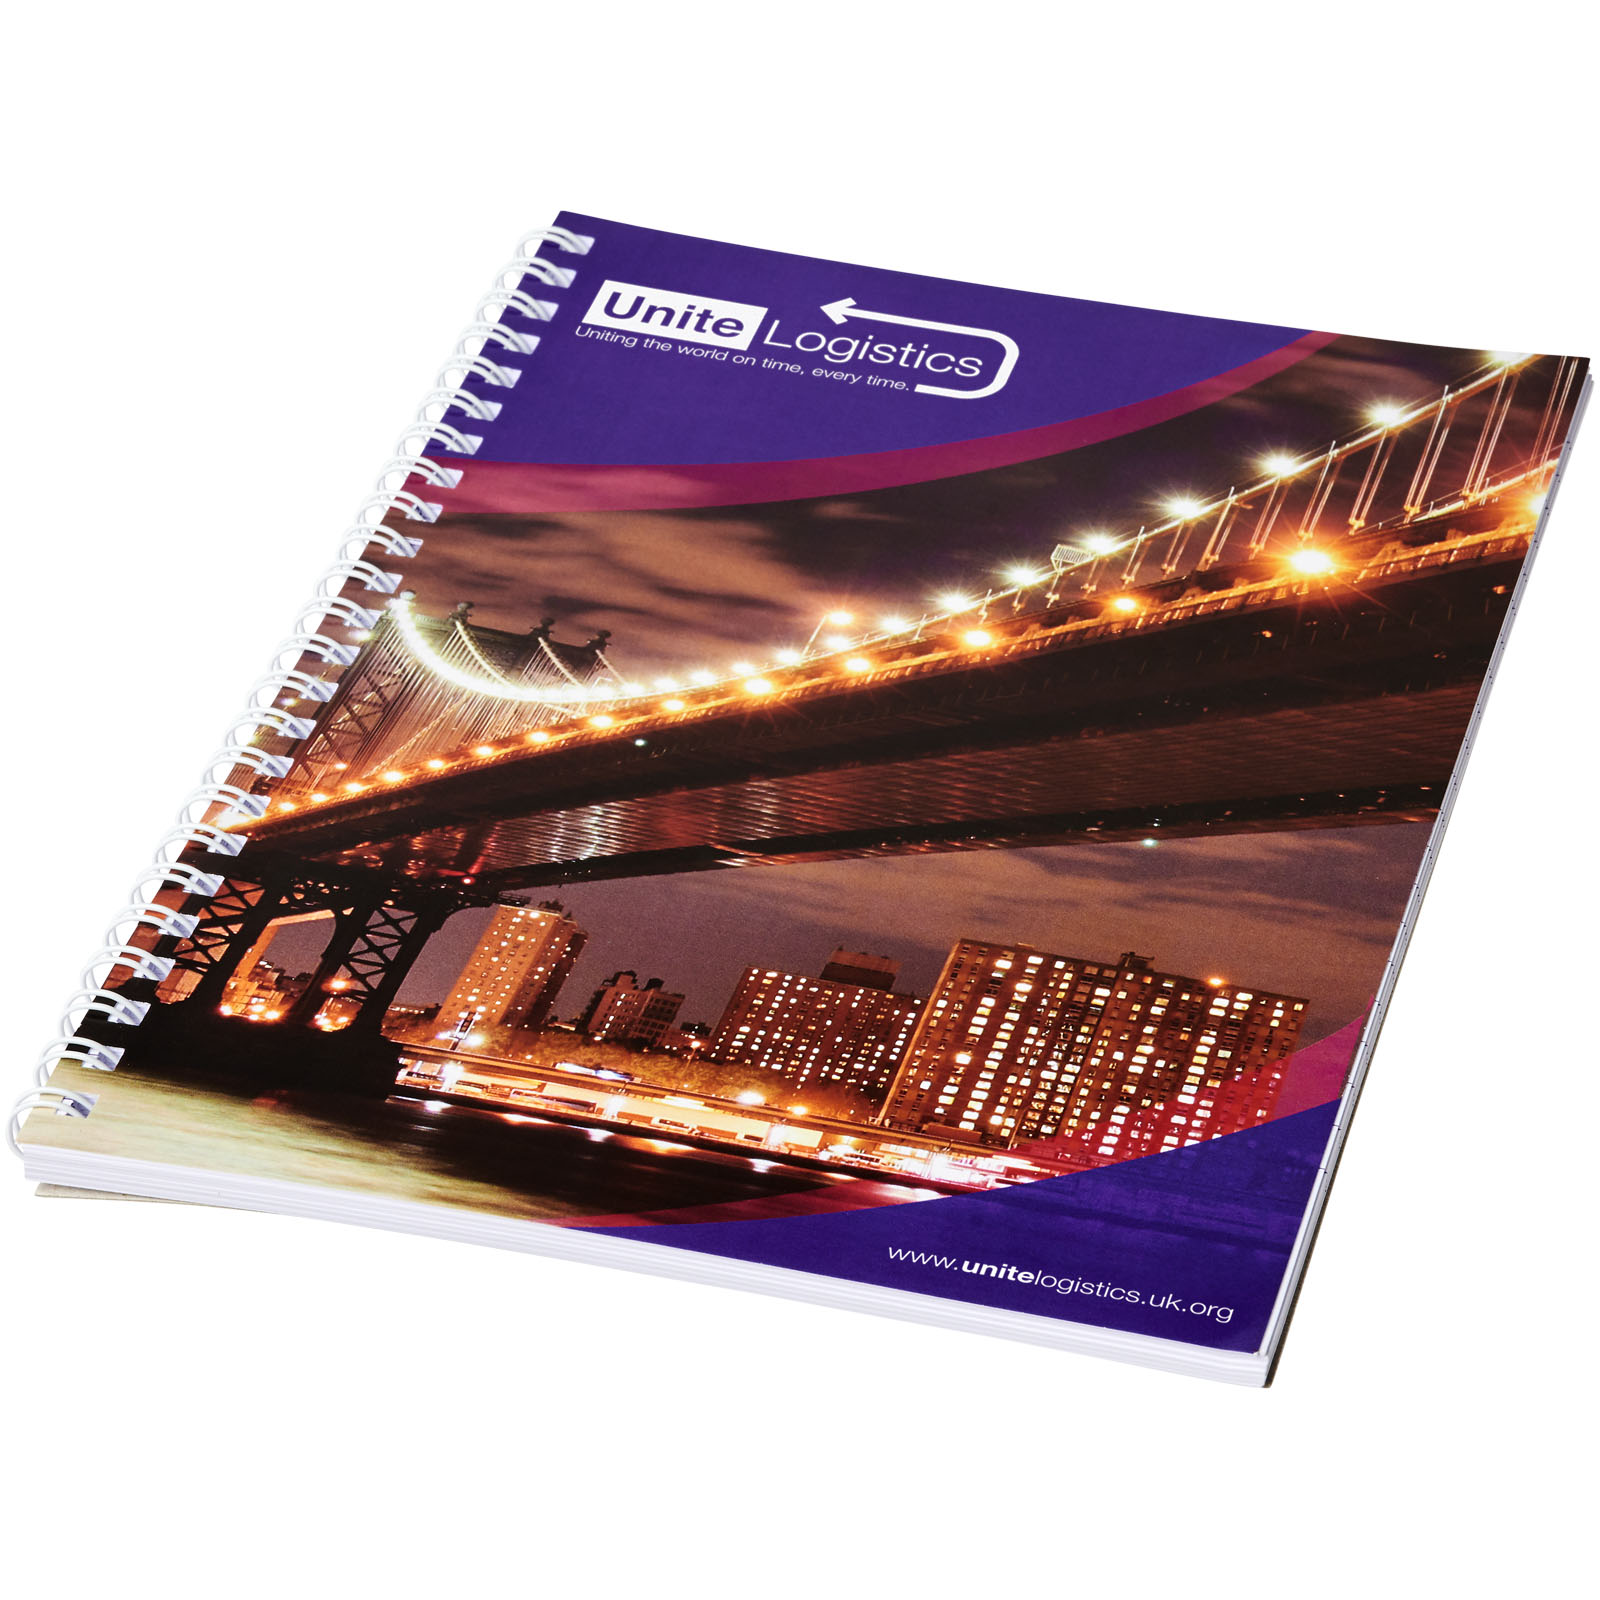 Advertising Soft cover notebooks - Desk-Mate® A4 spiral notebook with printed back cover